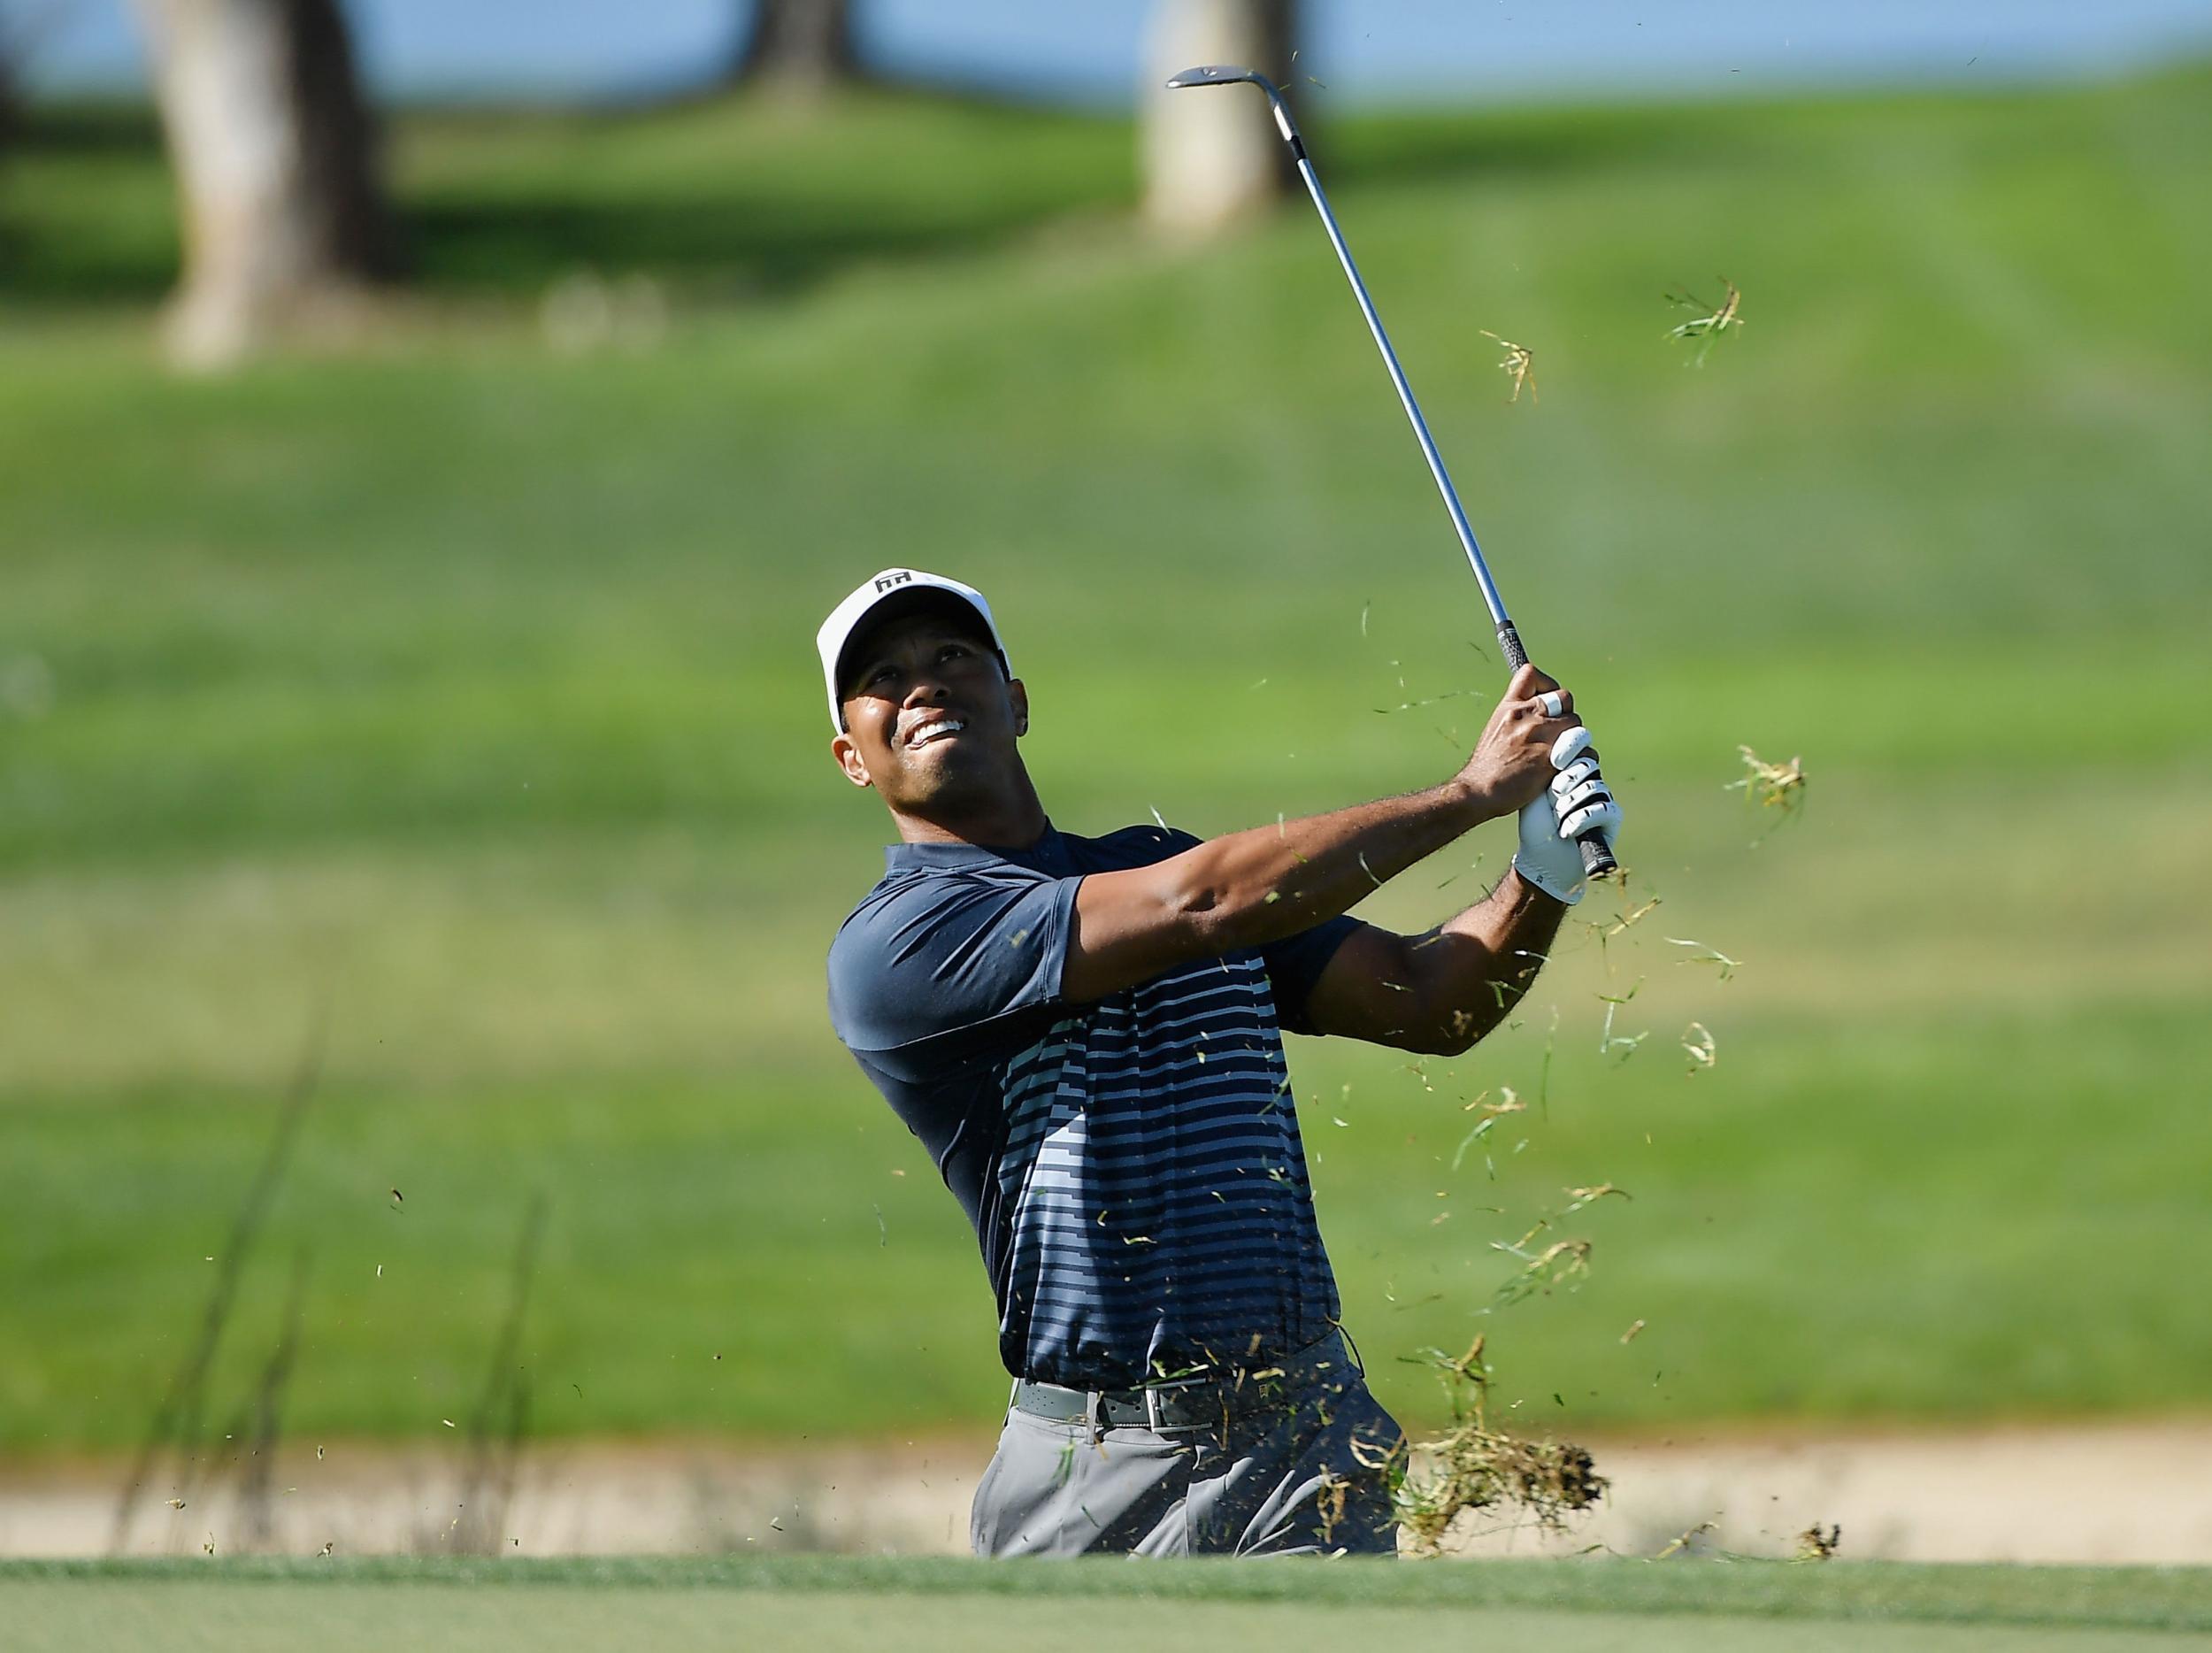 Woods carded a second round 71 to make the cut at Torrey Pines